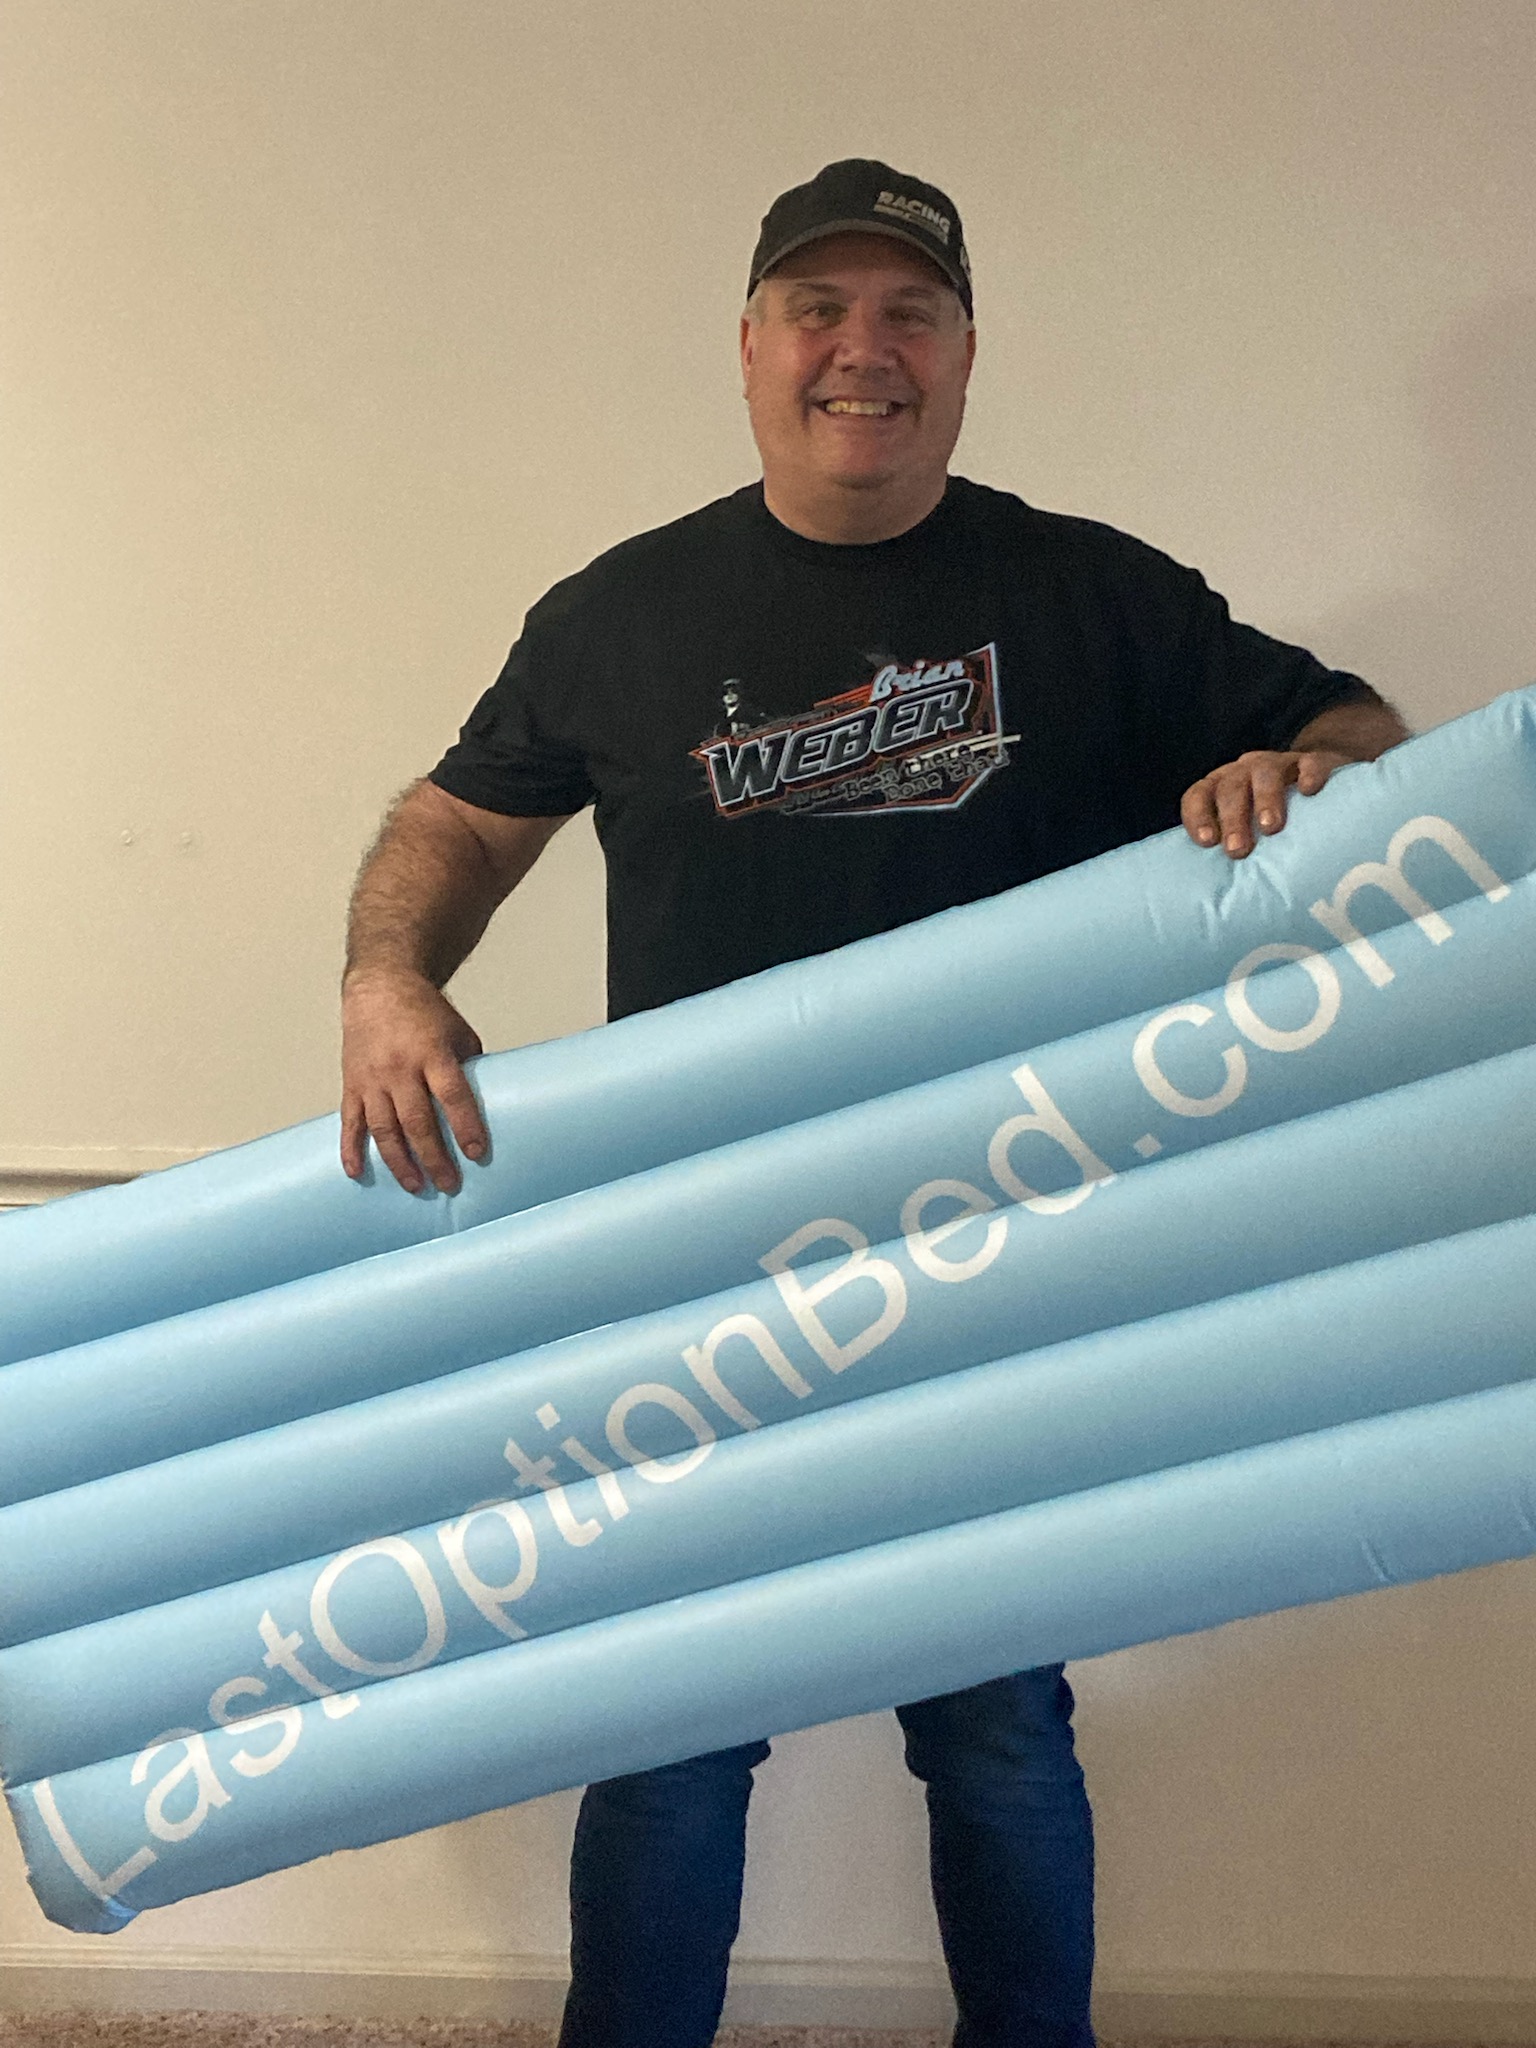 Brian Weber holding his new Last Option Bed